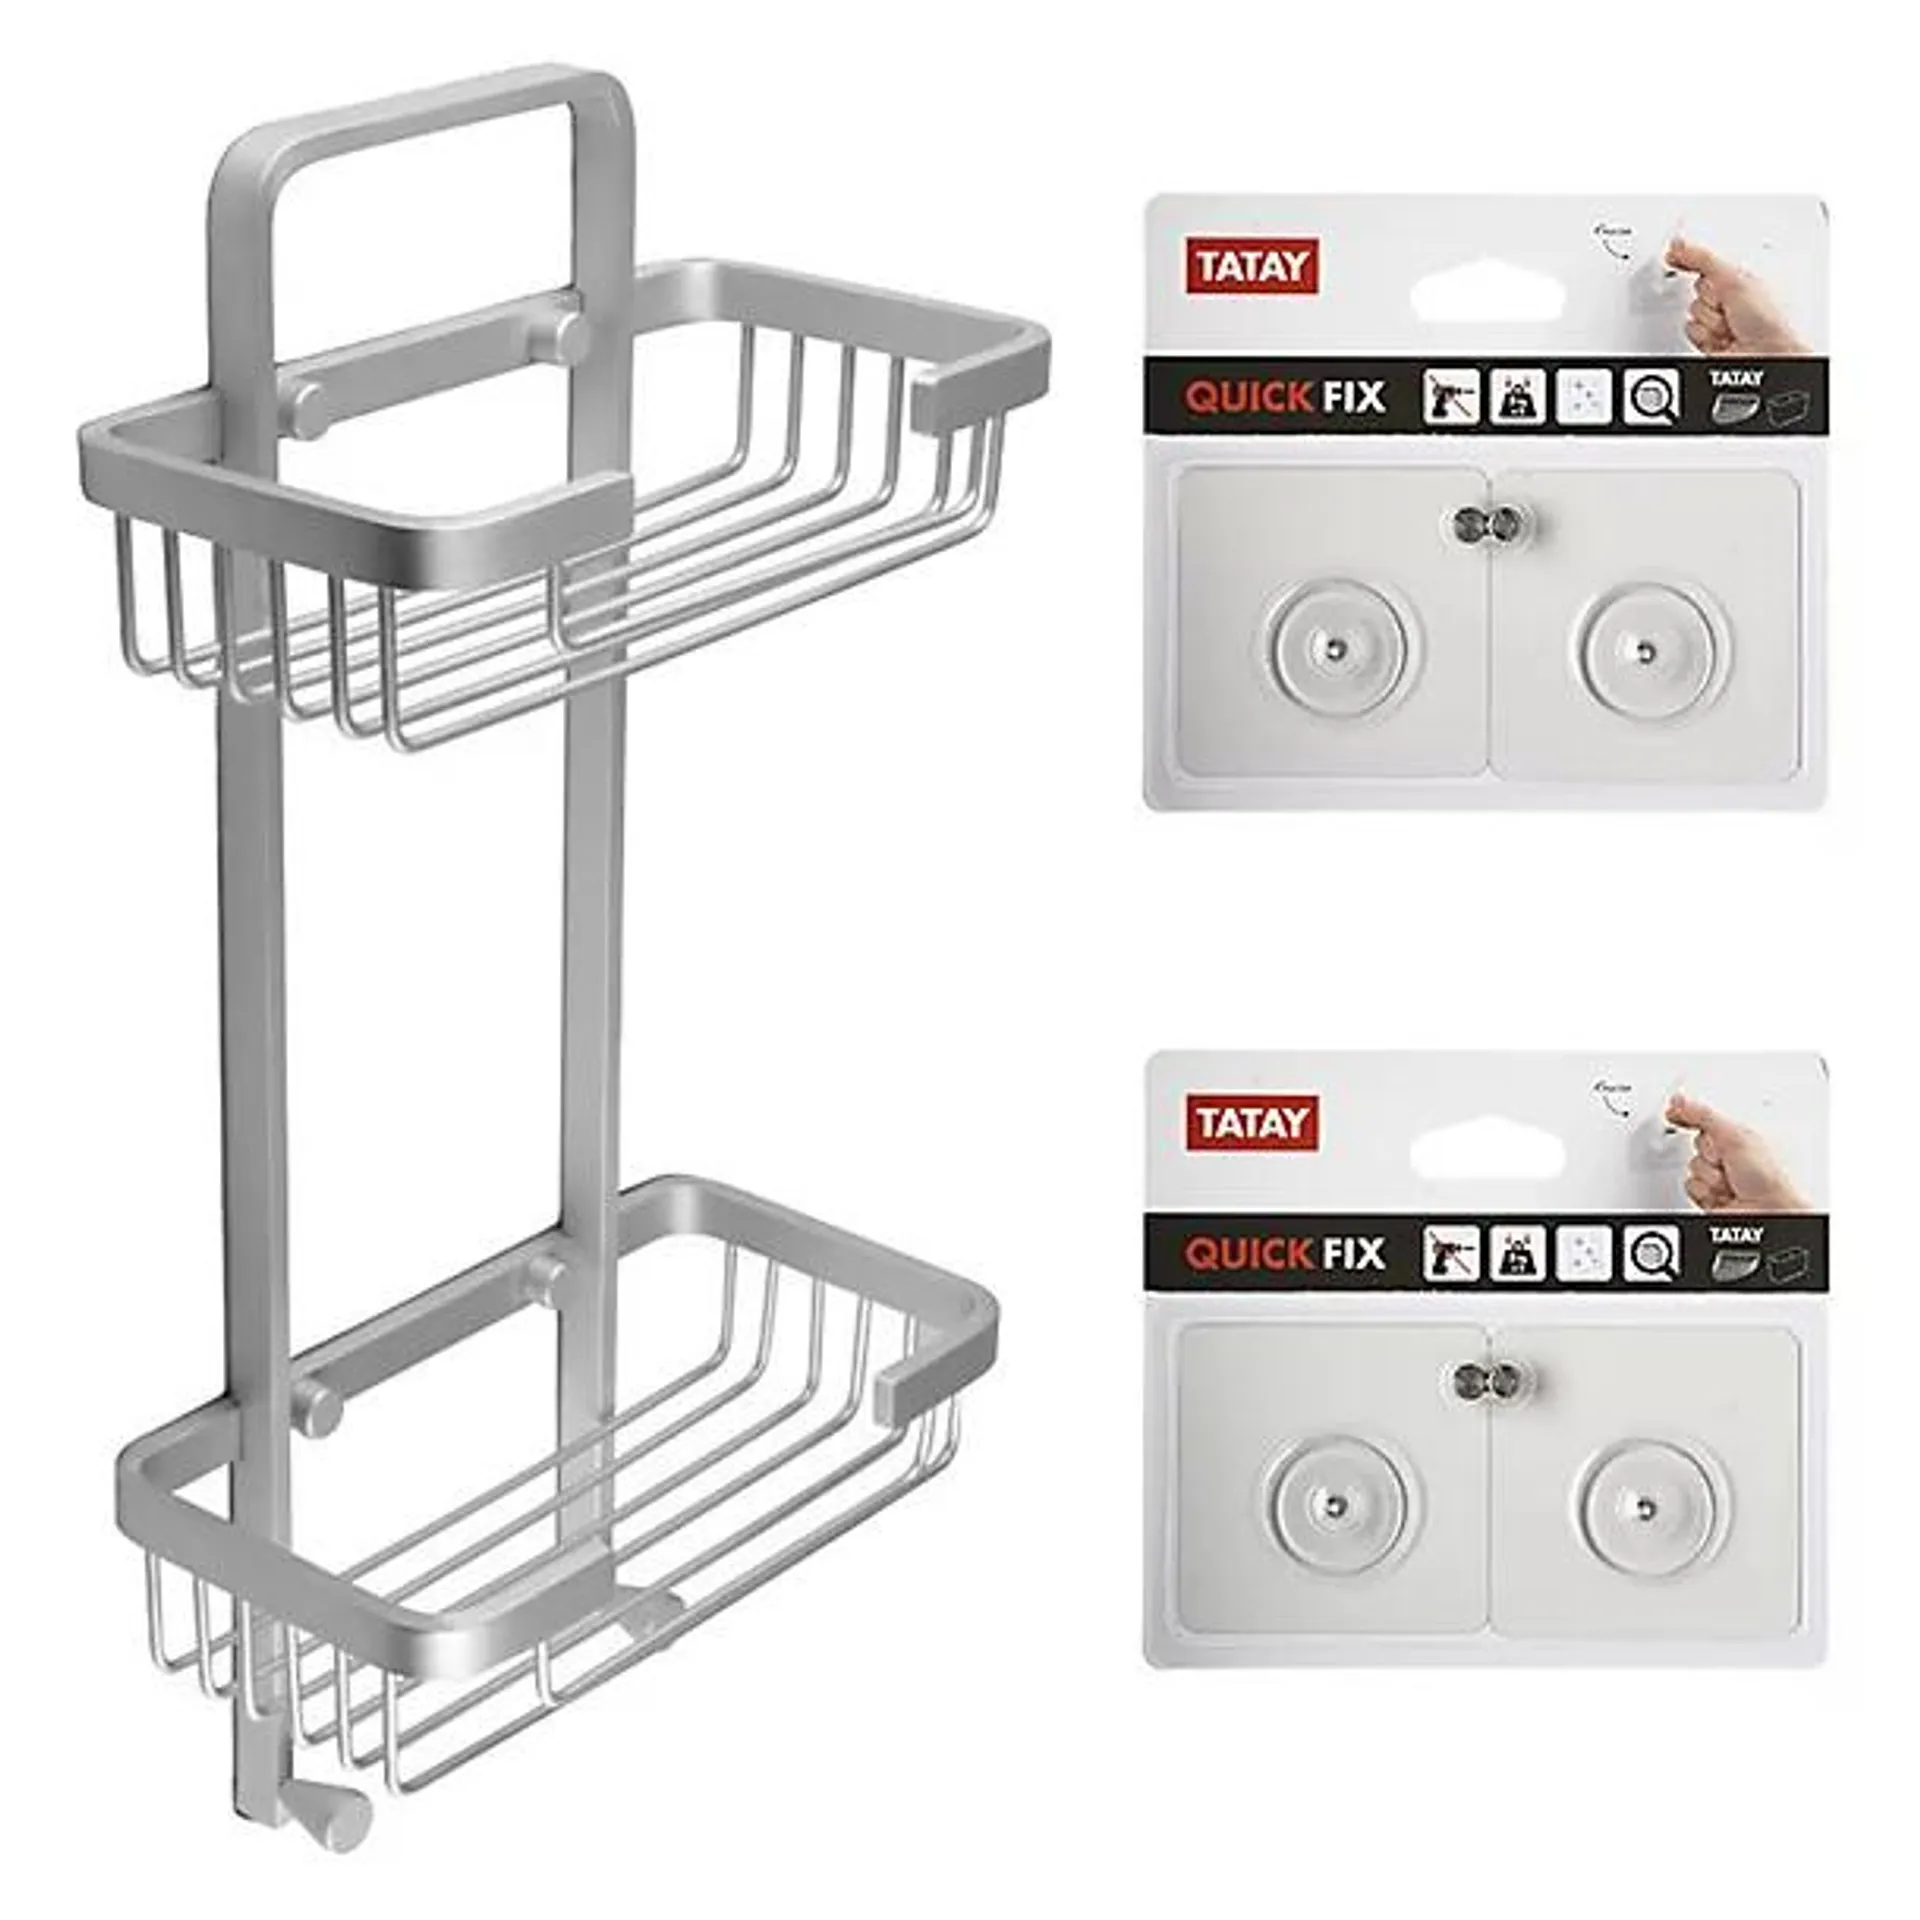 Tatay Double Basket Shower Caddy and Quick Fix Wall System Bundle